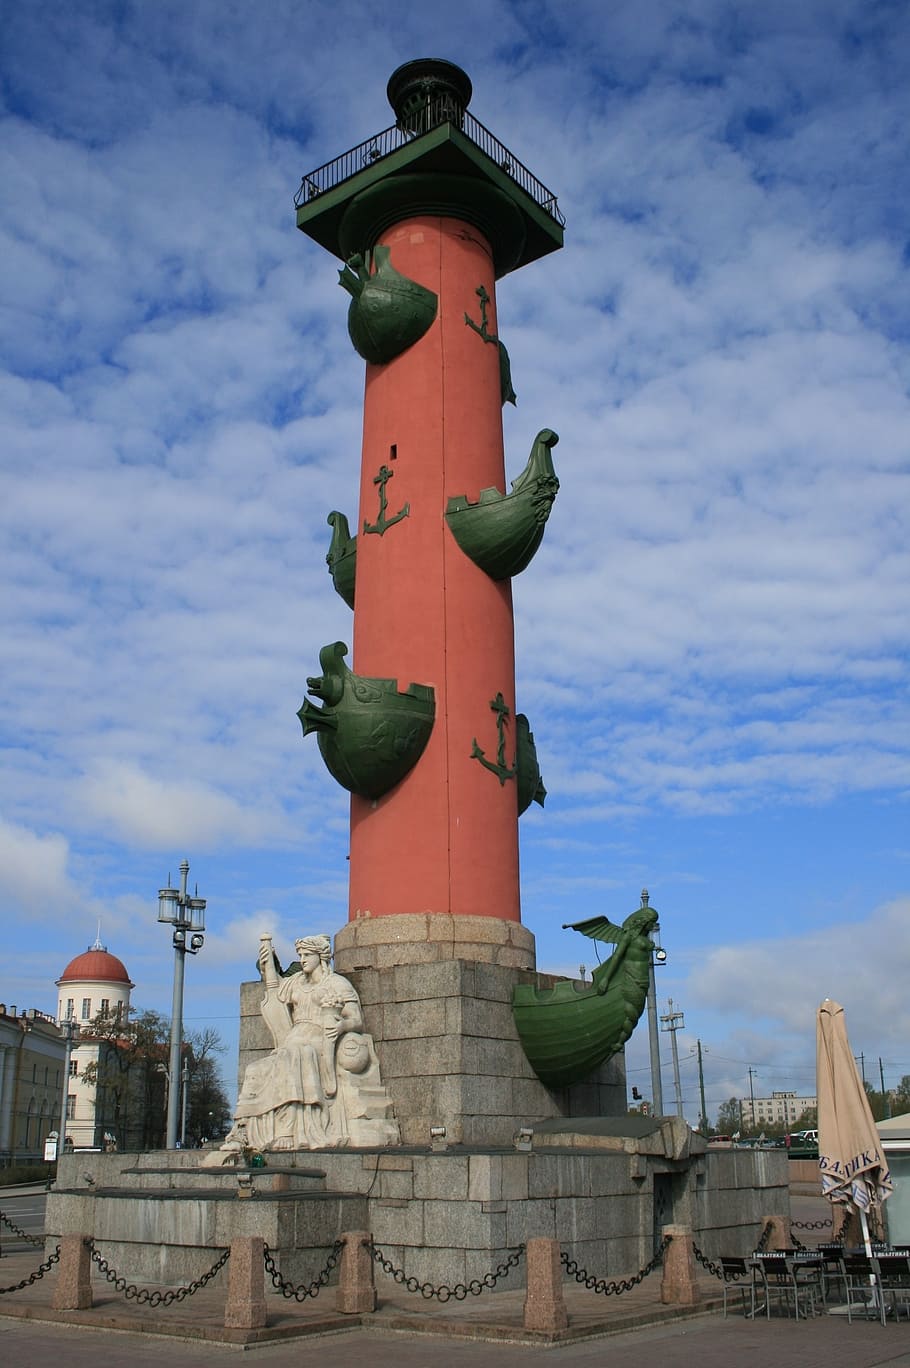 column, rostral, tall, red, maritime, navy, victories, decorated, ship bows, green